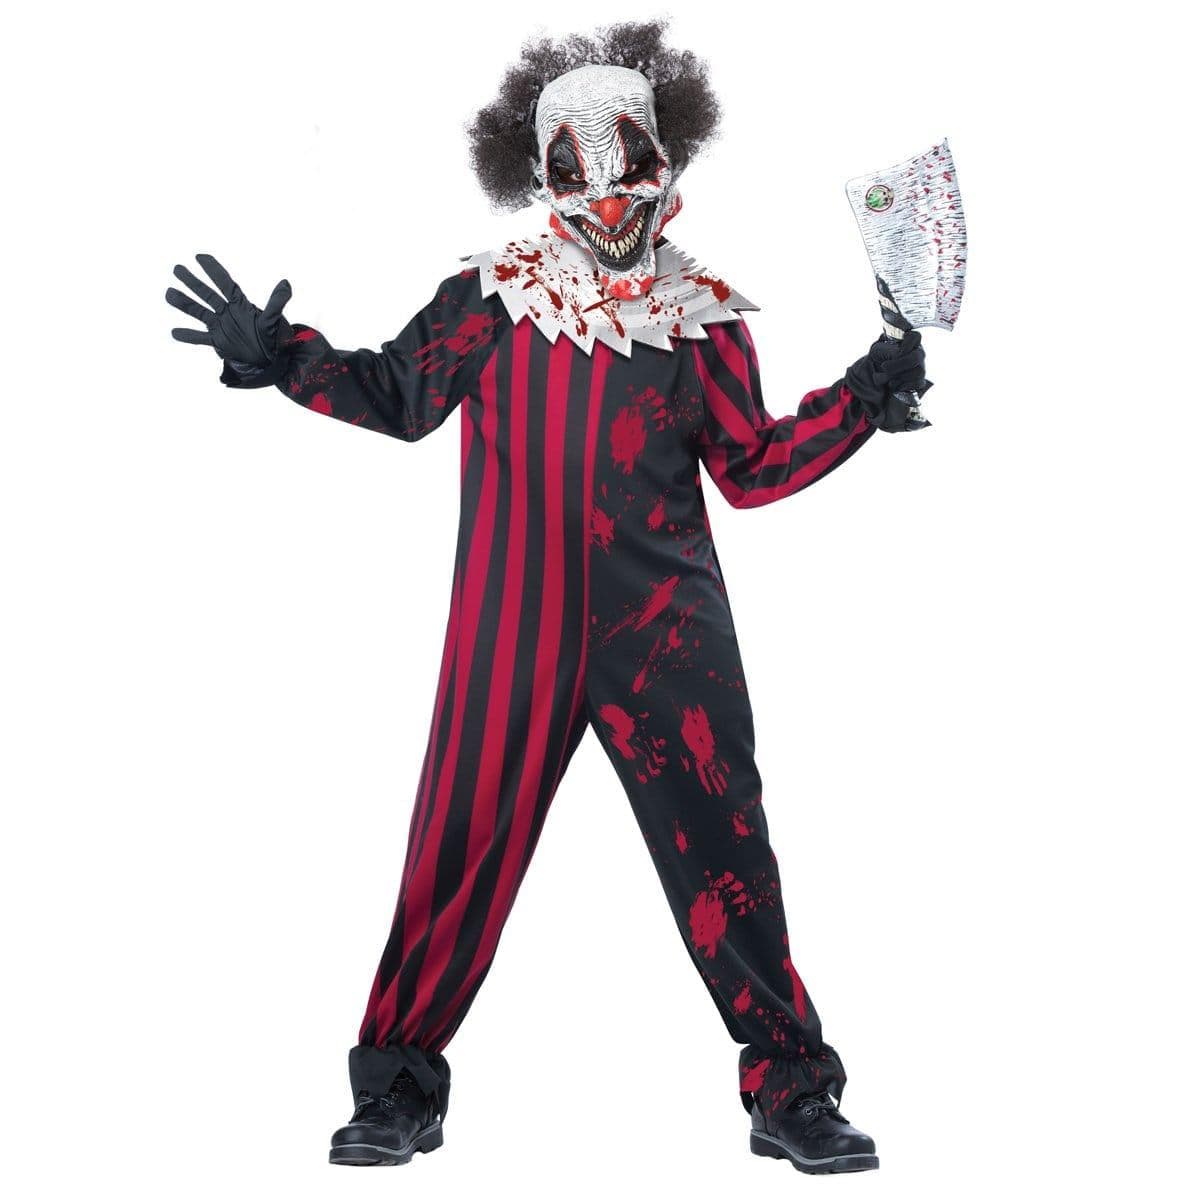 Buy Costumes Red Killer Clown Costume for Kids sold at Party Expert